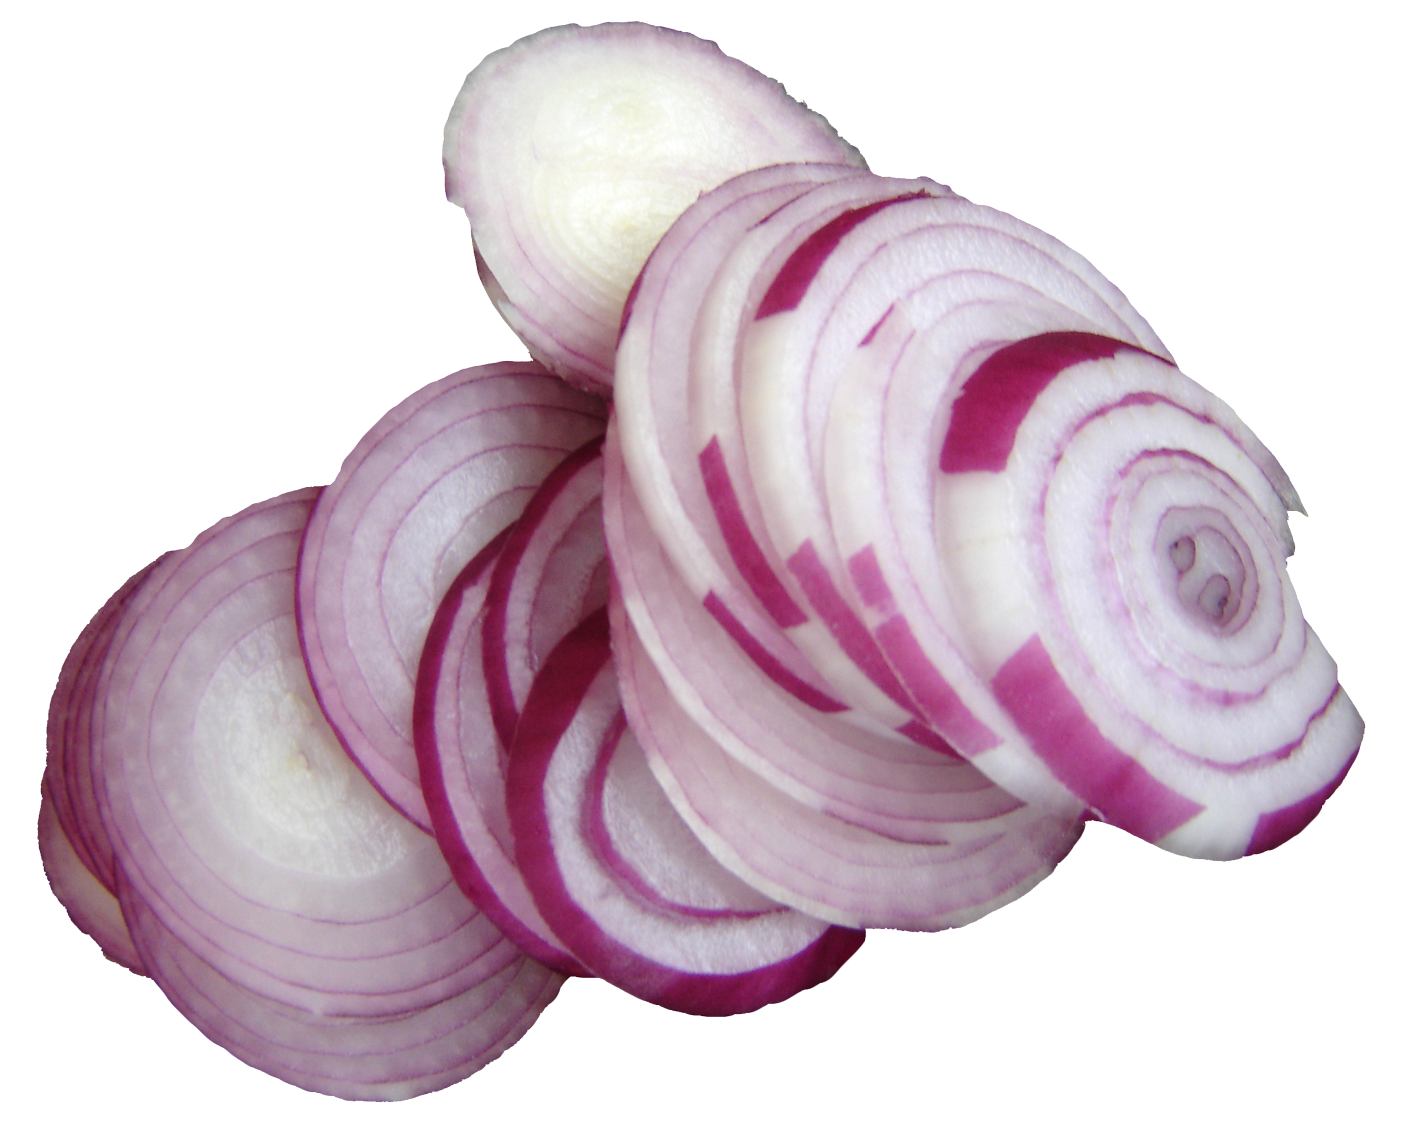 Png images pngpix all. Onion clipart shallot